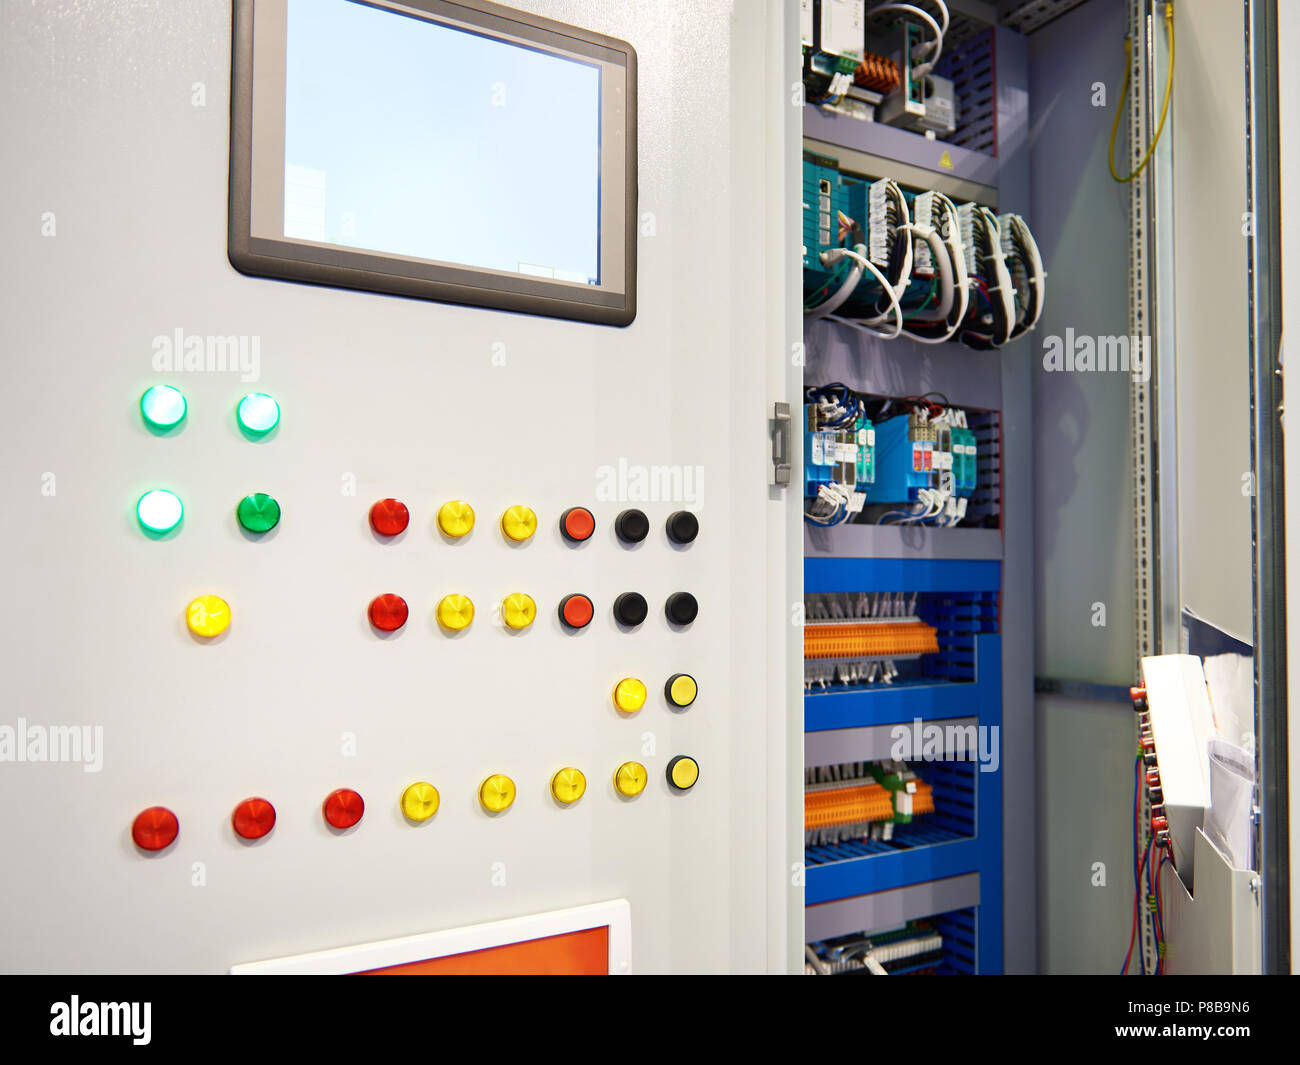 Communication box with control panel for electronic components Stock Photo